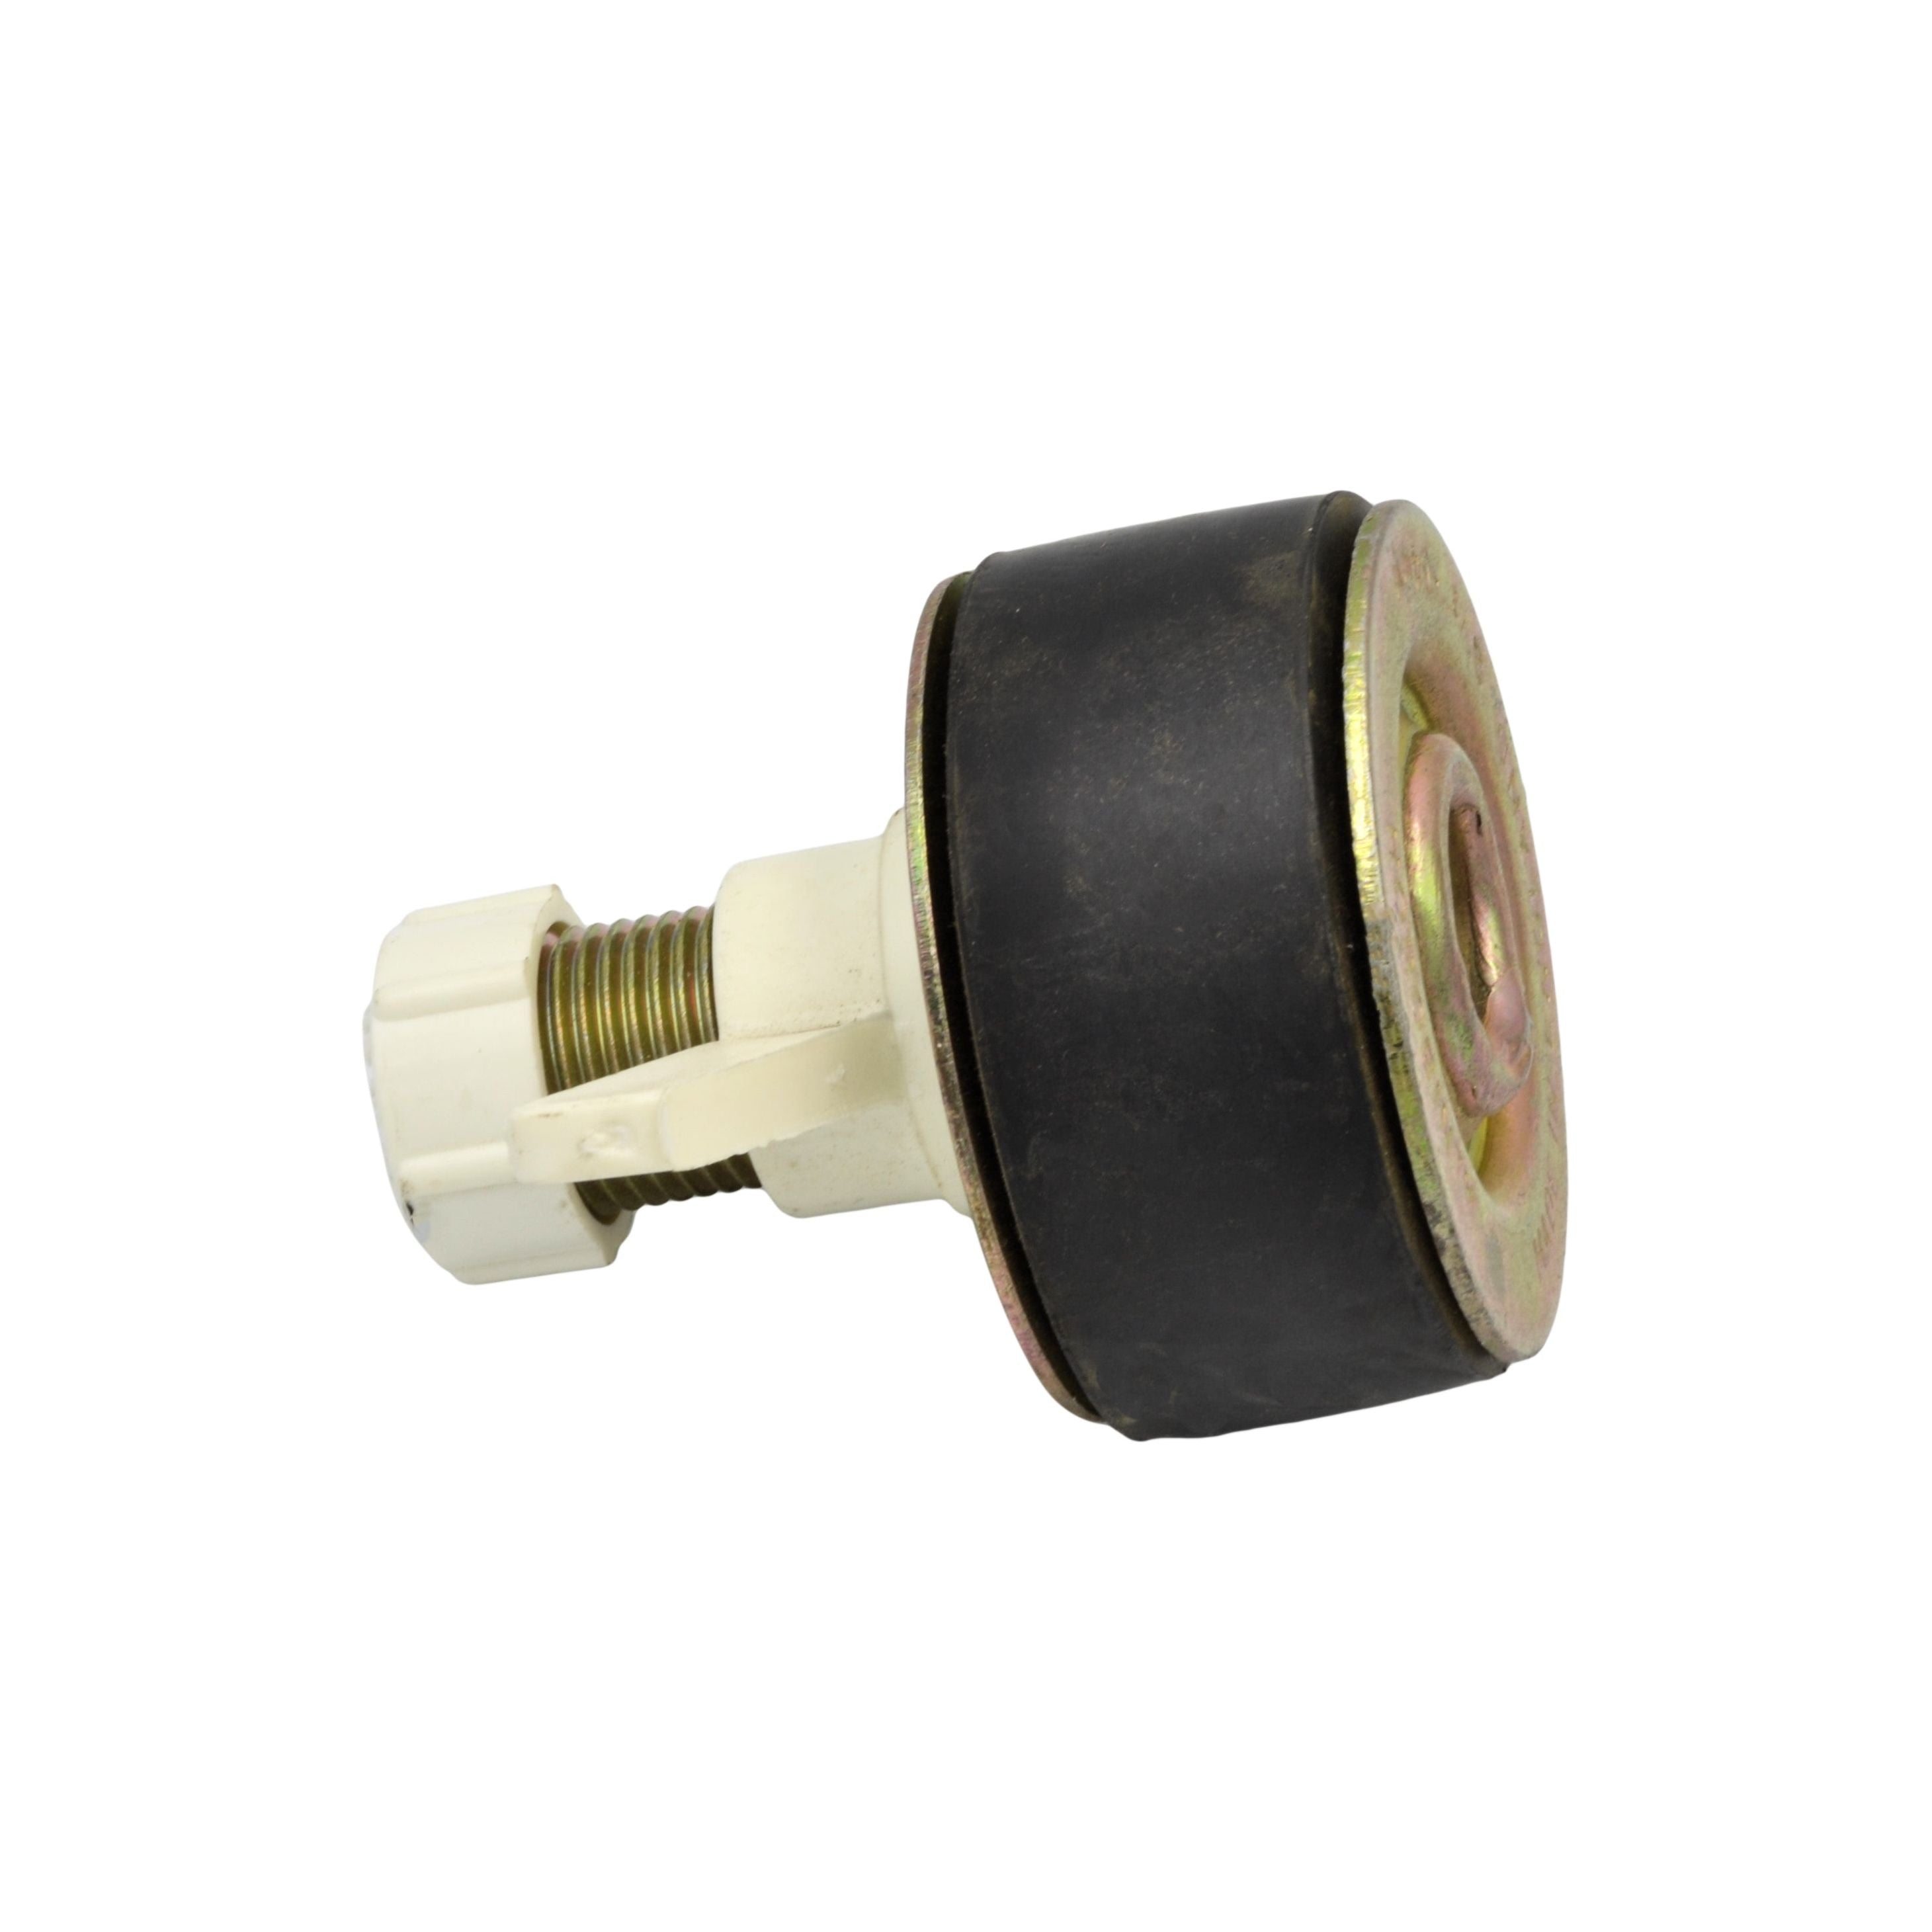 2 1/2"  65mm Steel Expanding Plug with 1/2" Bypass 60-82mm Range